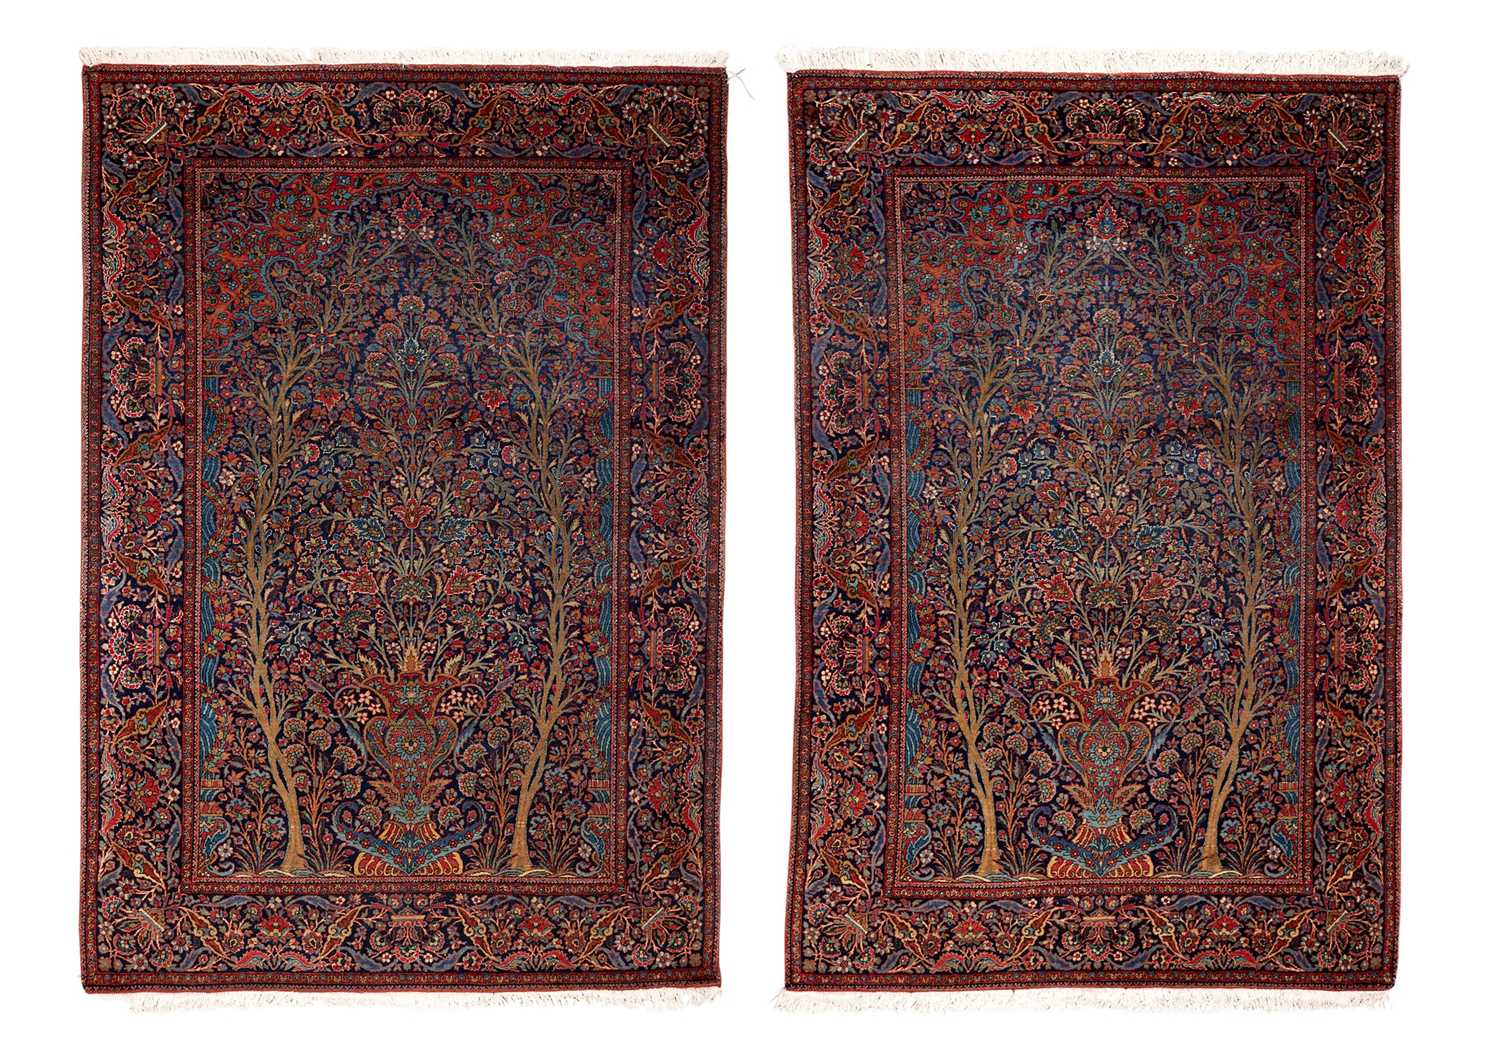 A FINE PAIR OF 1920'S PERSIAN CARPETS